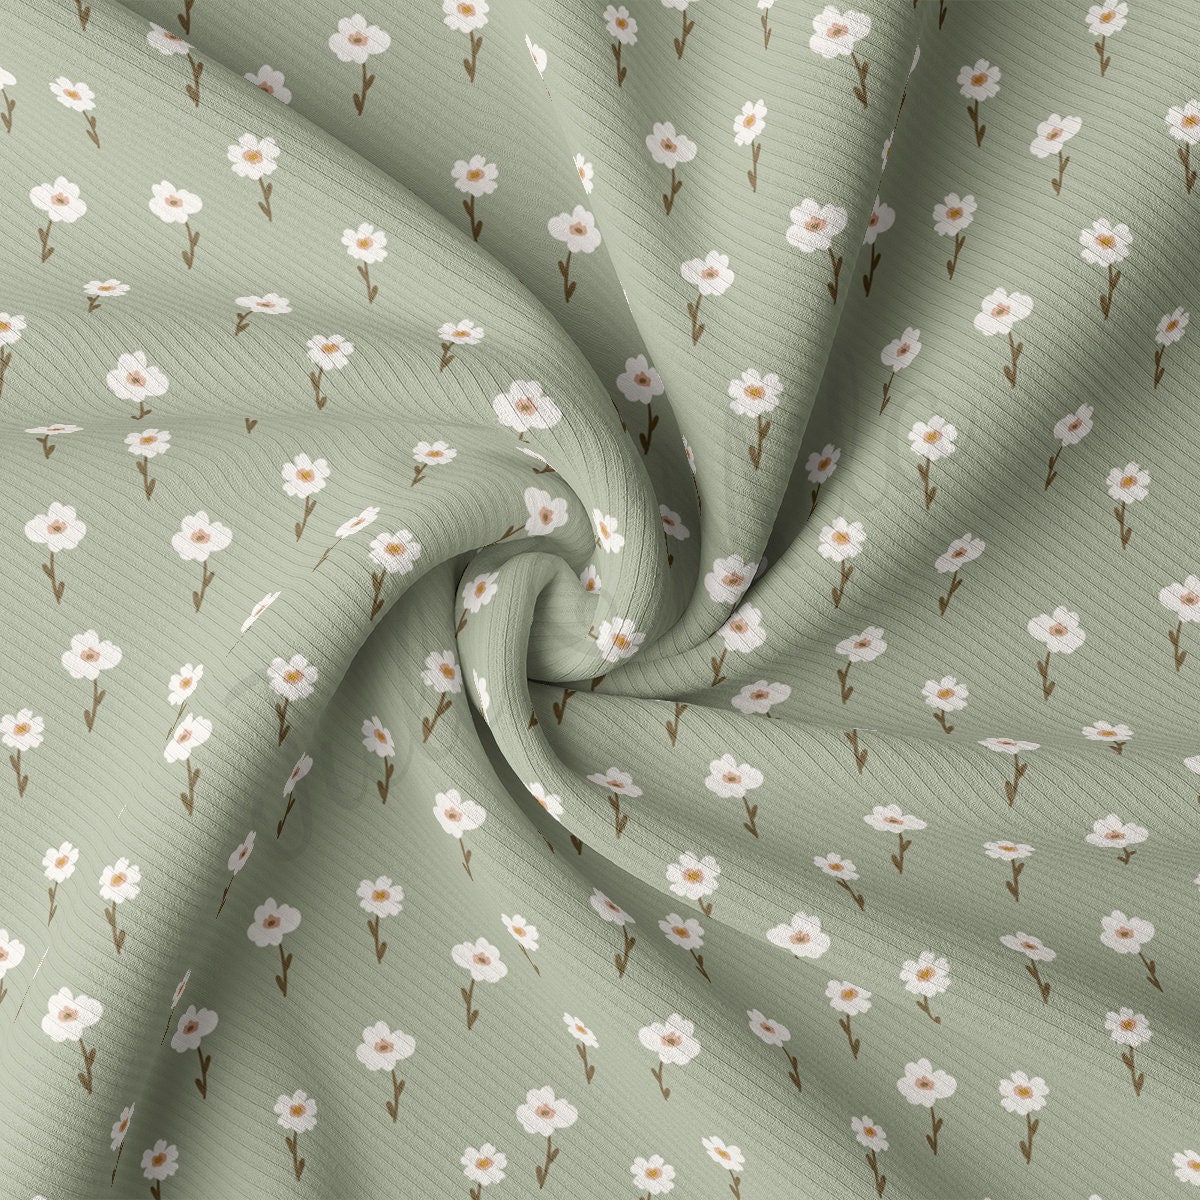 Floral Rib Knit Fabric by the Yard Ribbed Jersey Stretchy Soft Polyester Stretch Fabric 1 Yard  RBK2183